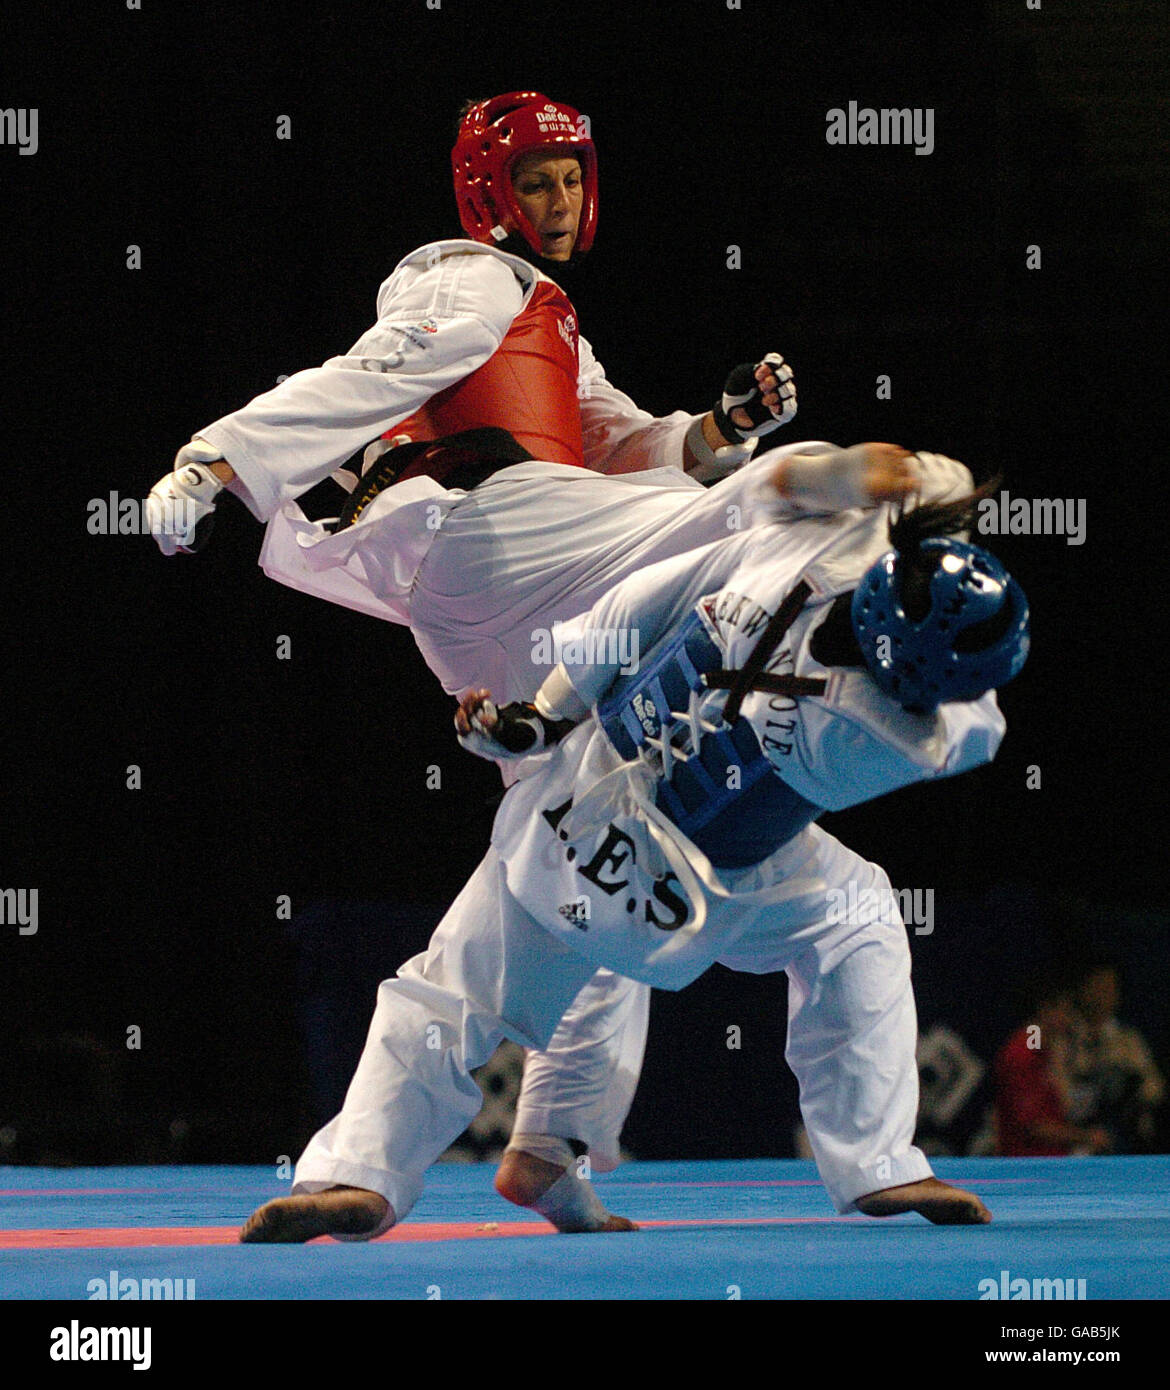 Athletics - 2007 World Taekwondo Bejing Olympic Qualification - MEN Arena. Italy's Veronica Calabrese (red) in action against Lesotho's Likeleli Thamae (blue) Stock Photo